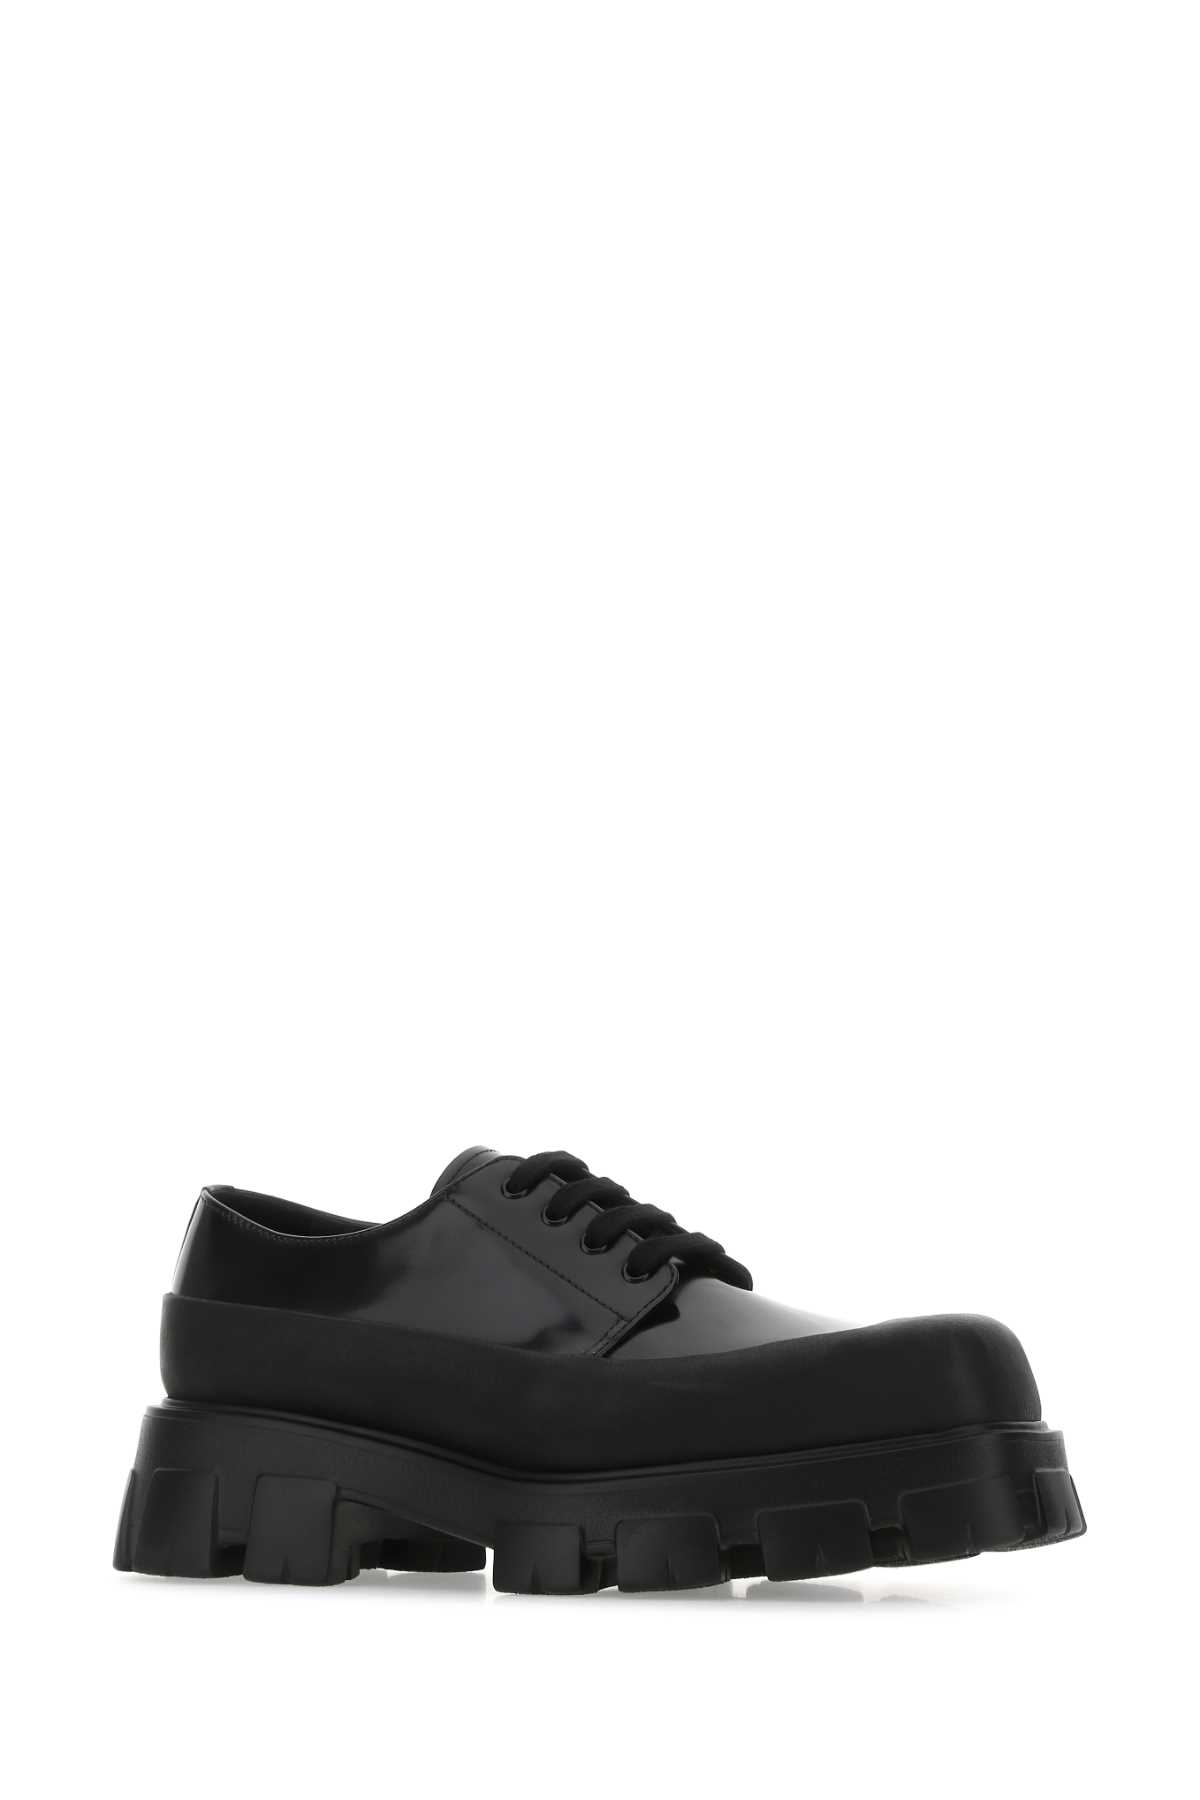 Prada Black Leather Lace-up Shoes In F0002